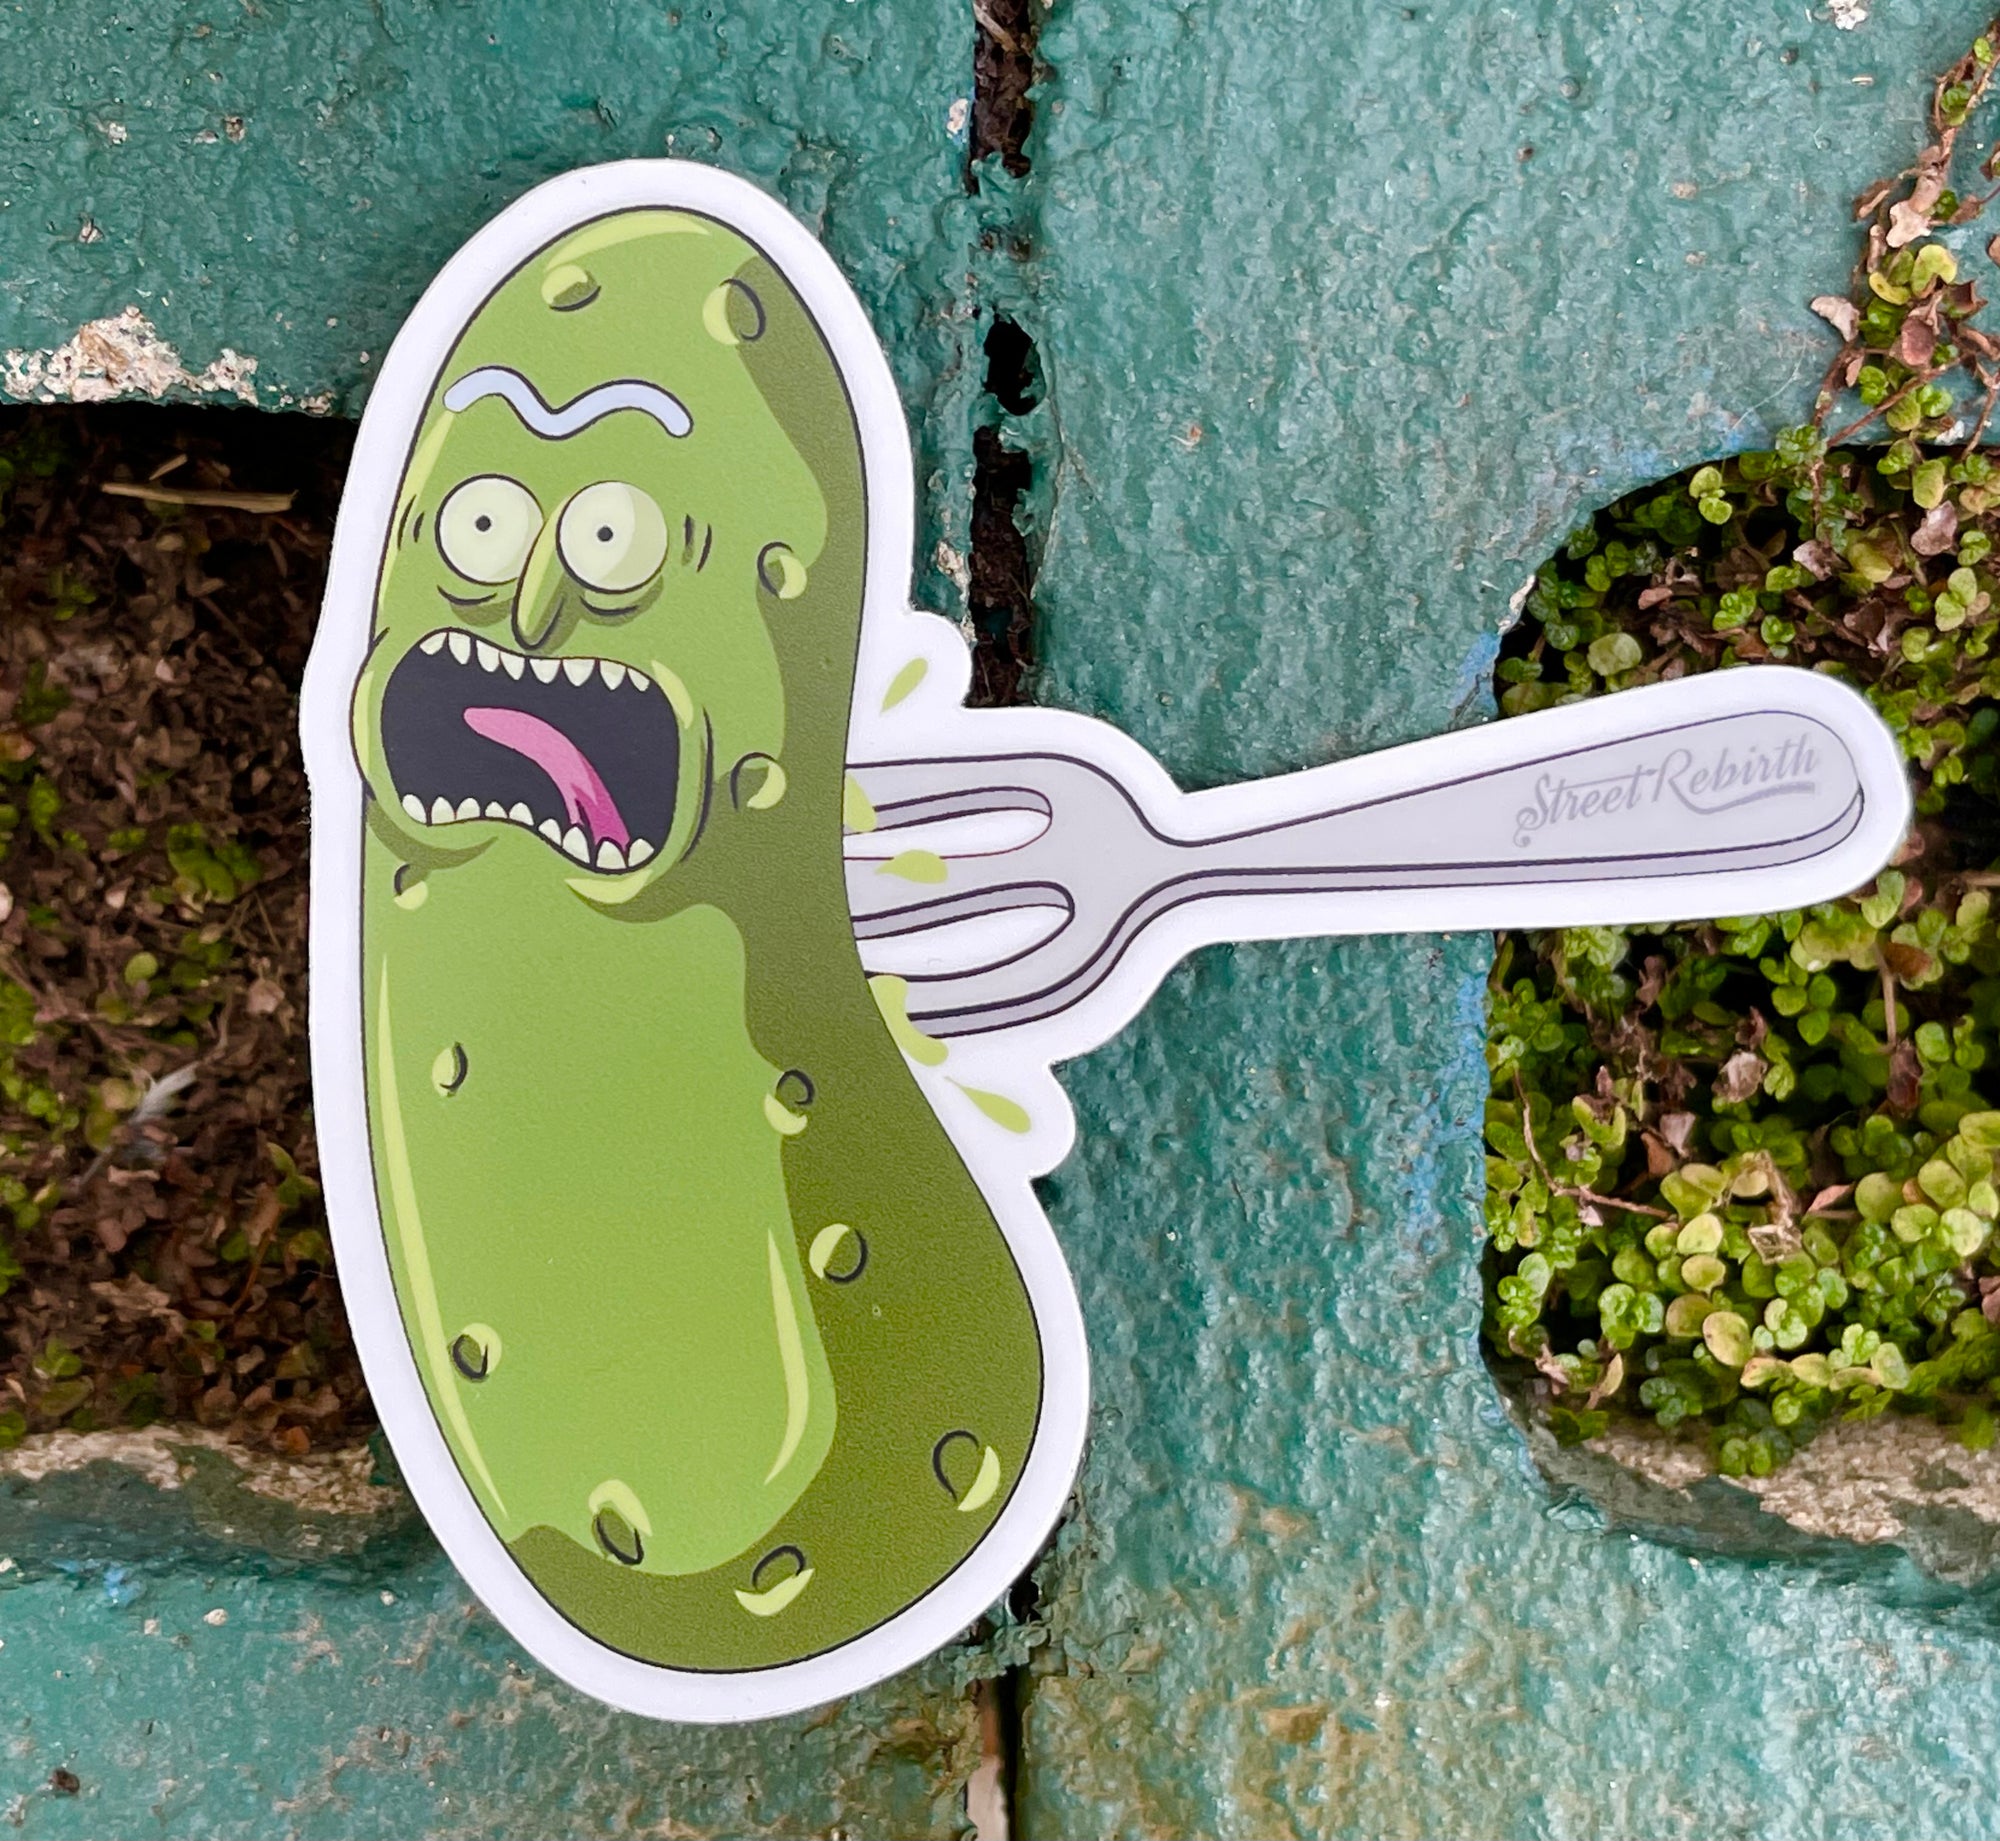 Pickle Rick Sticker – One 4 Inch Water Proof Vinyl Sticker – For Hydro Flask, Skateboard, Laptop, Planner, Car, Collecting, Gifting